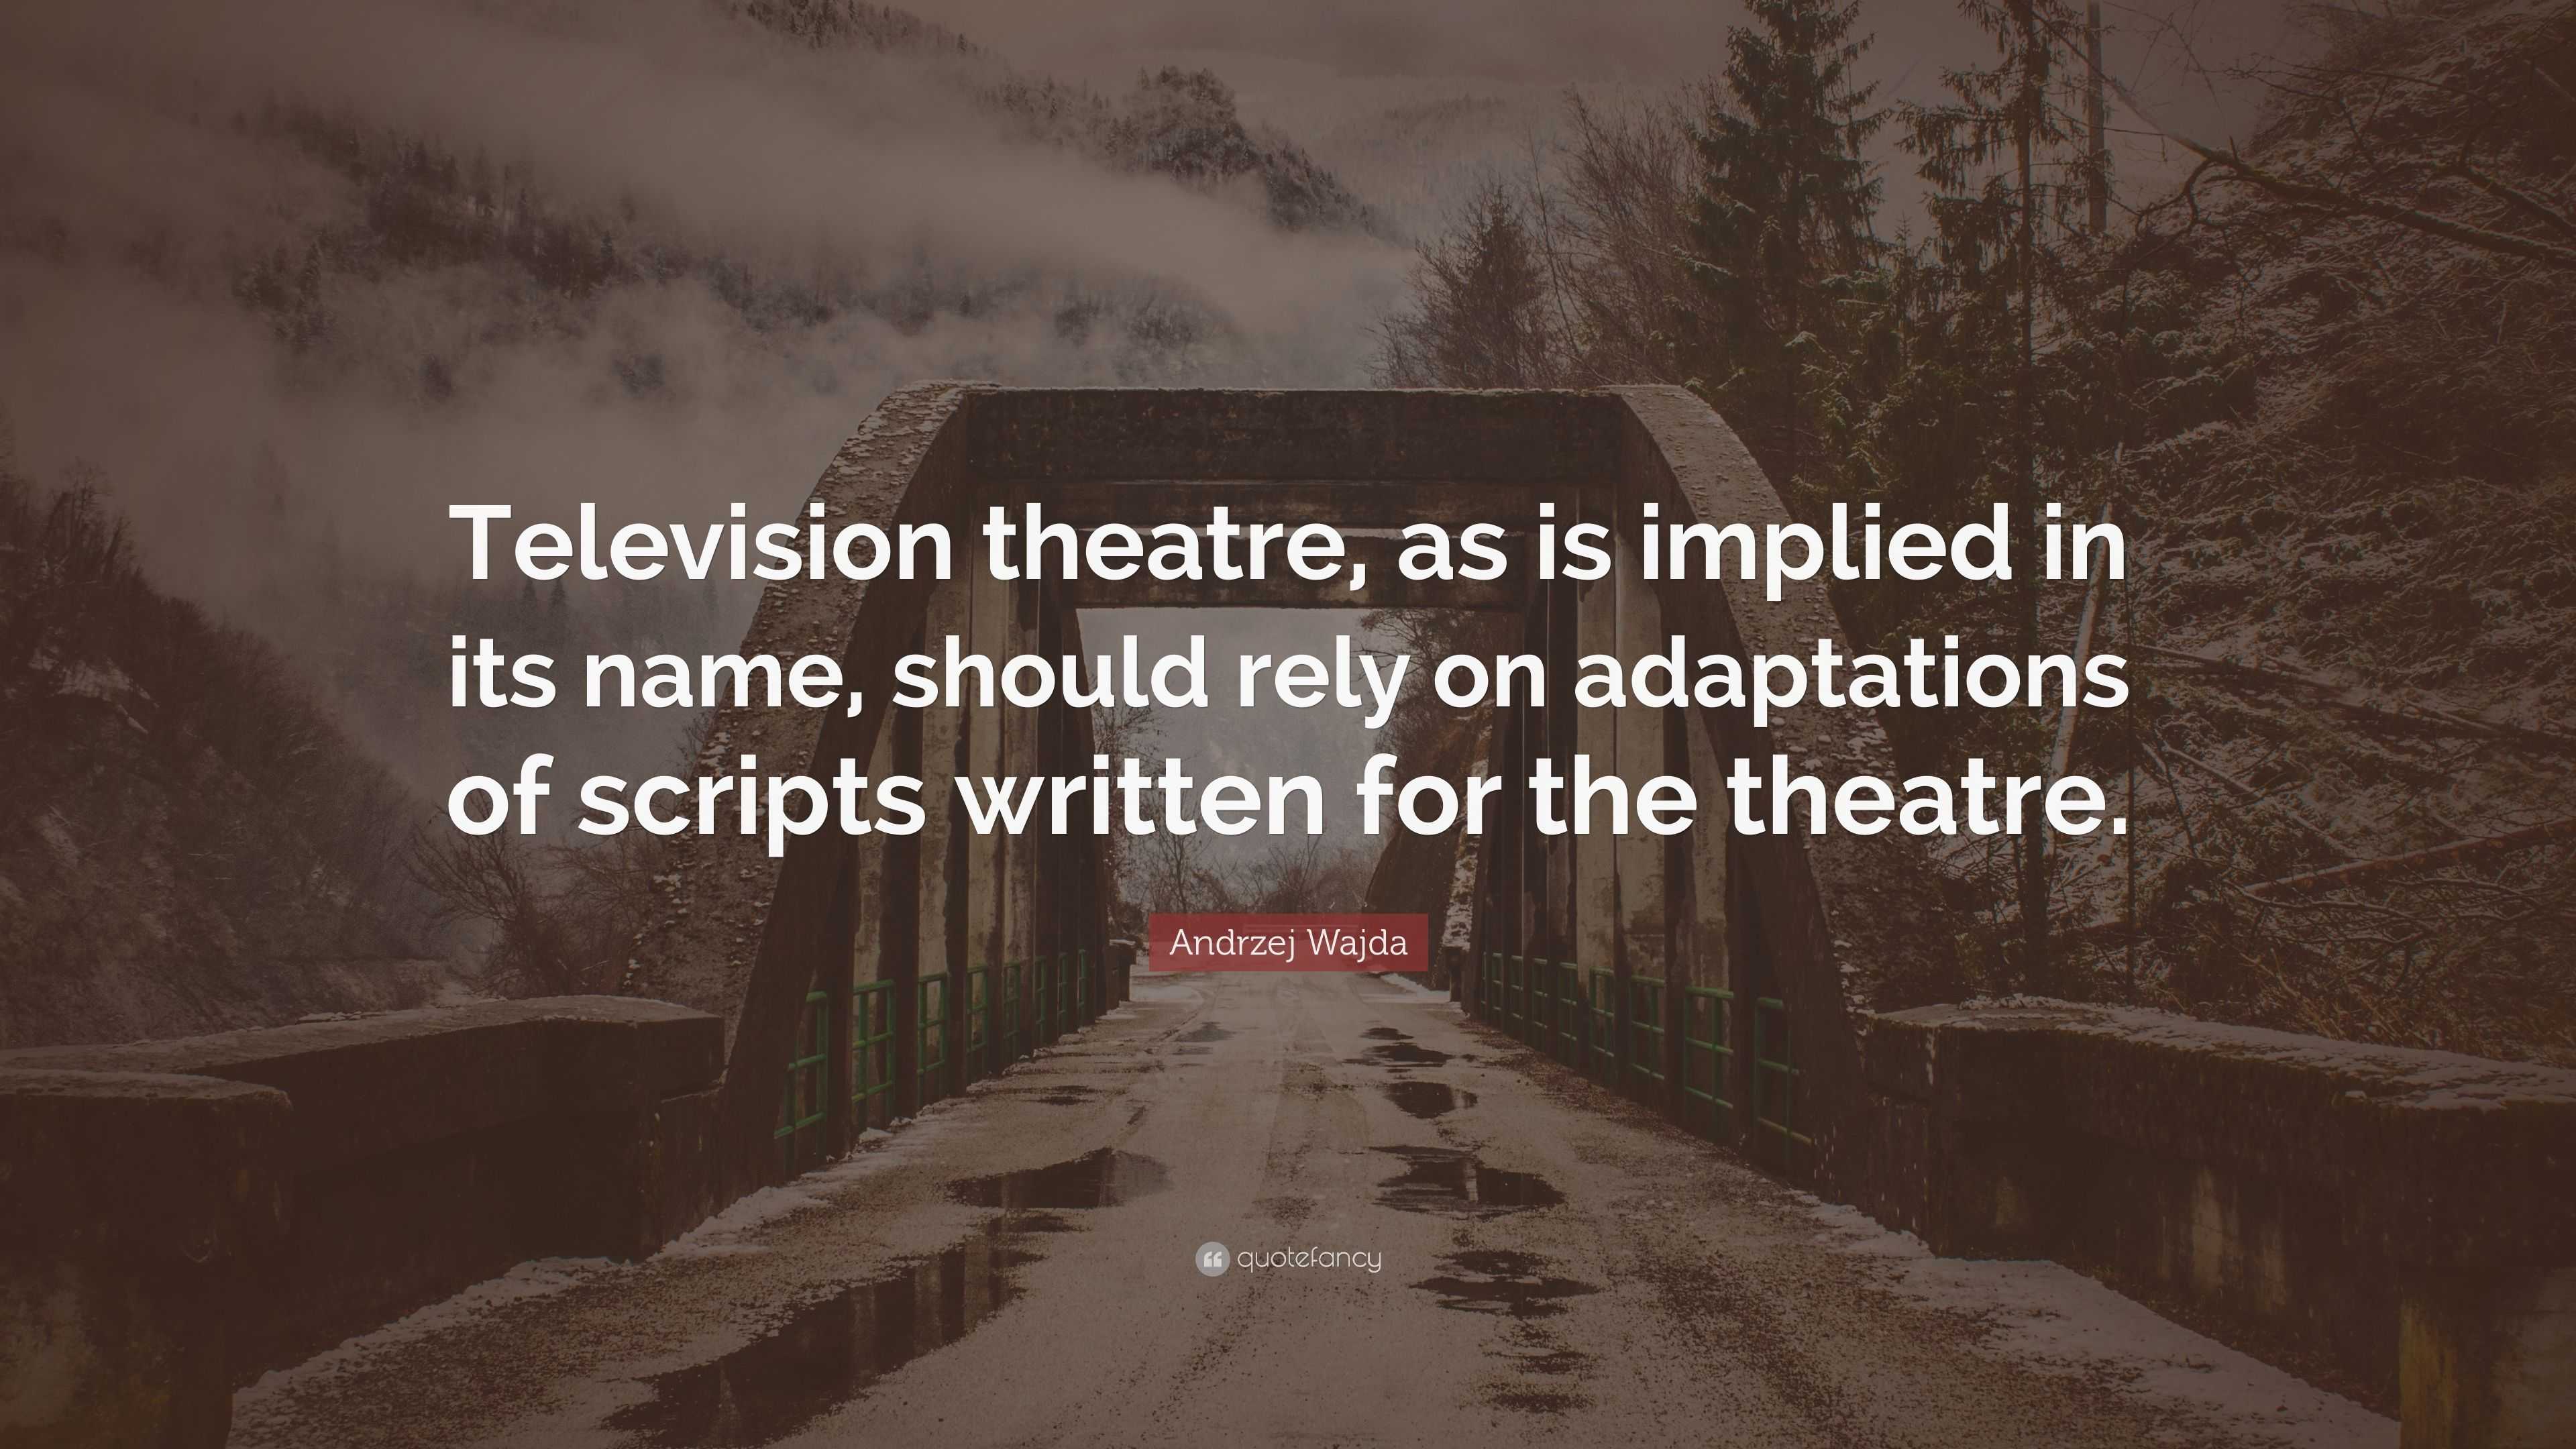 Andrzej Wajda Quote: “Television theatre, as is implied in its name ...